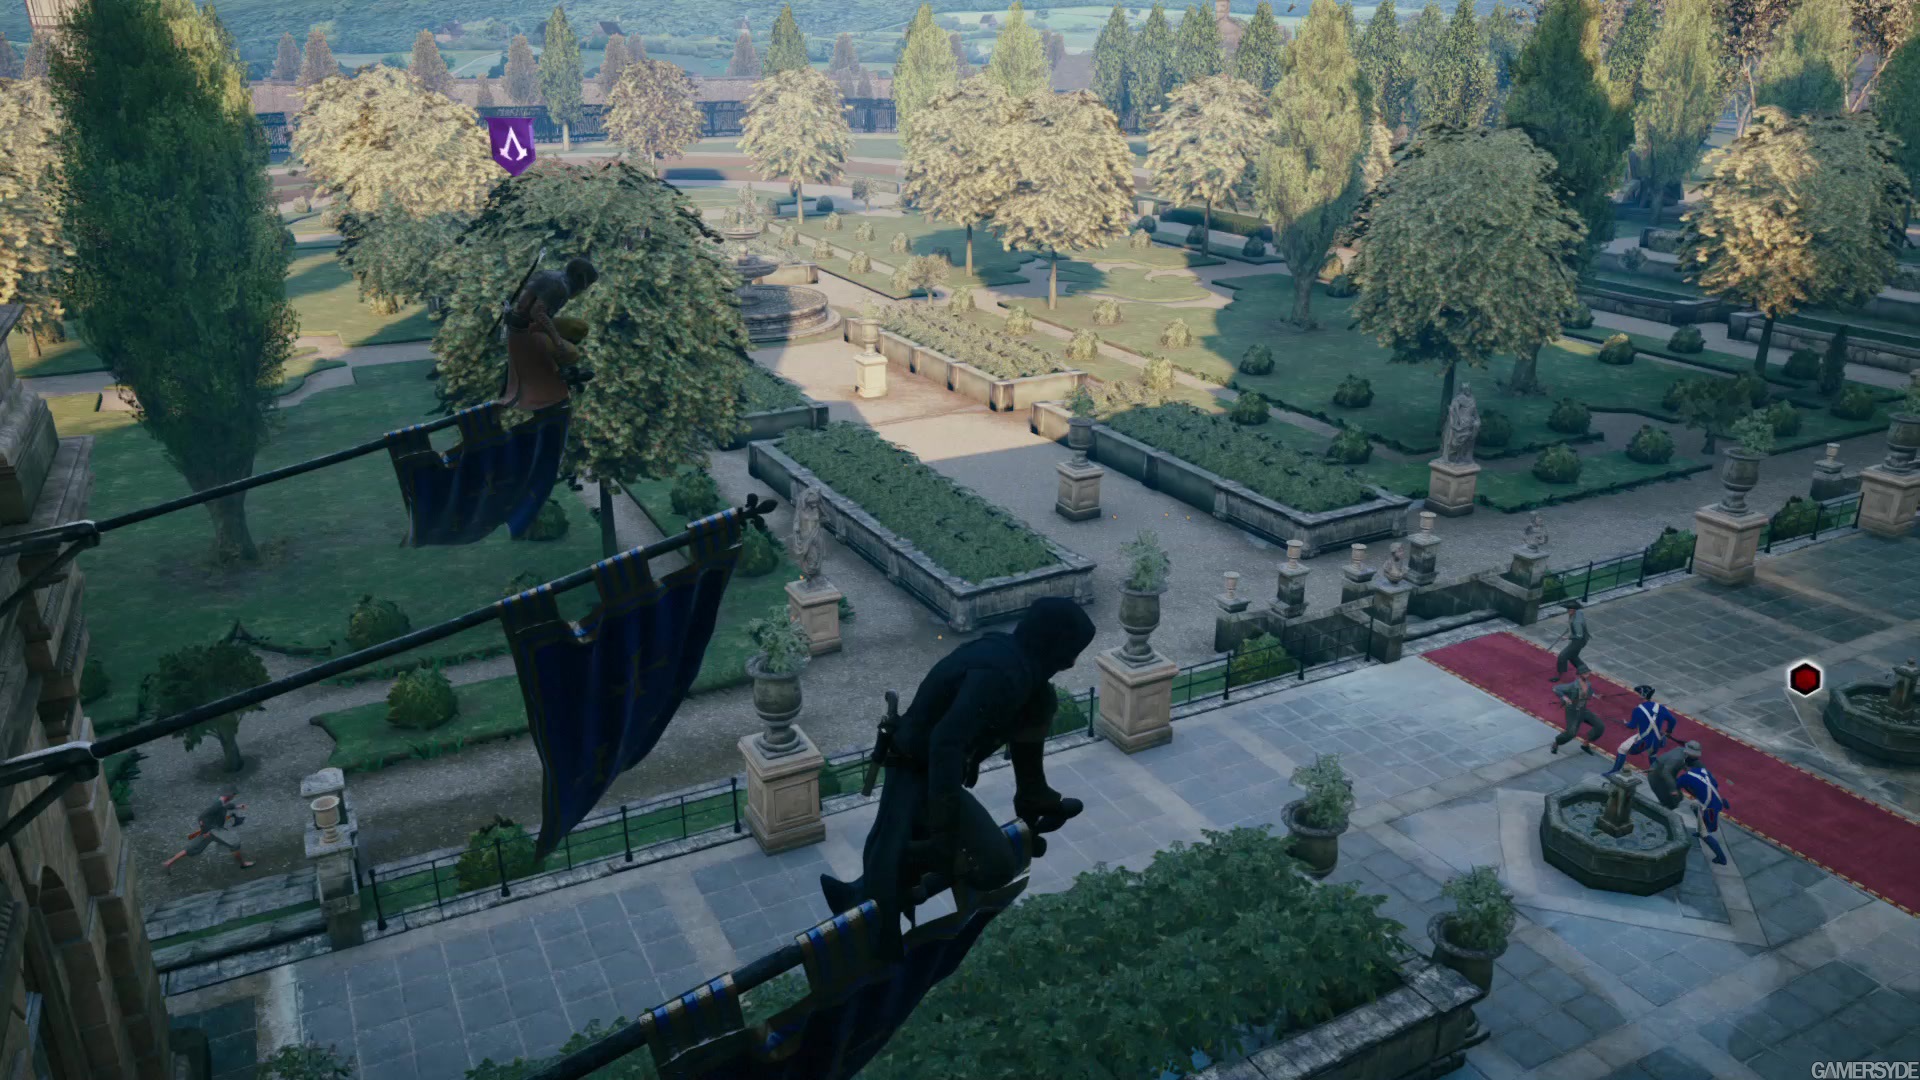 http://images.gamersyde.com/image_assassin_s_creed_unity-25265-2908_0018.jpg